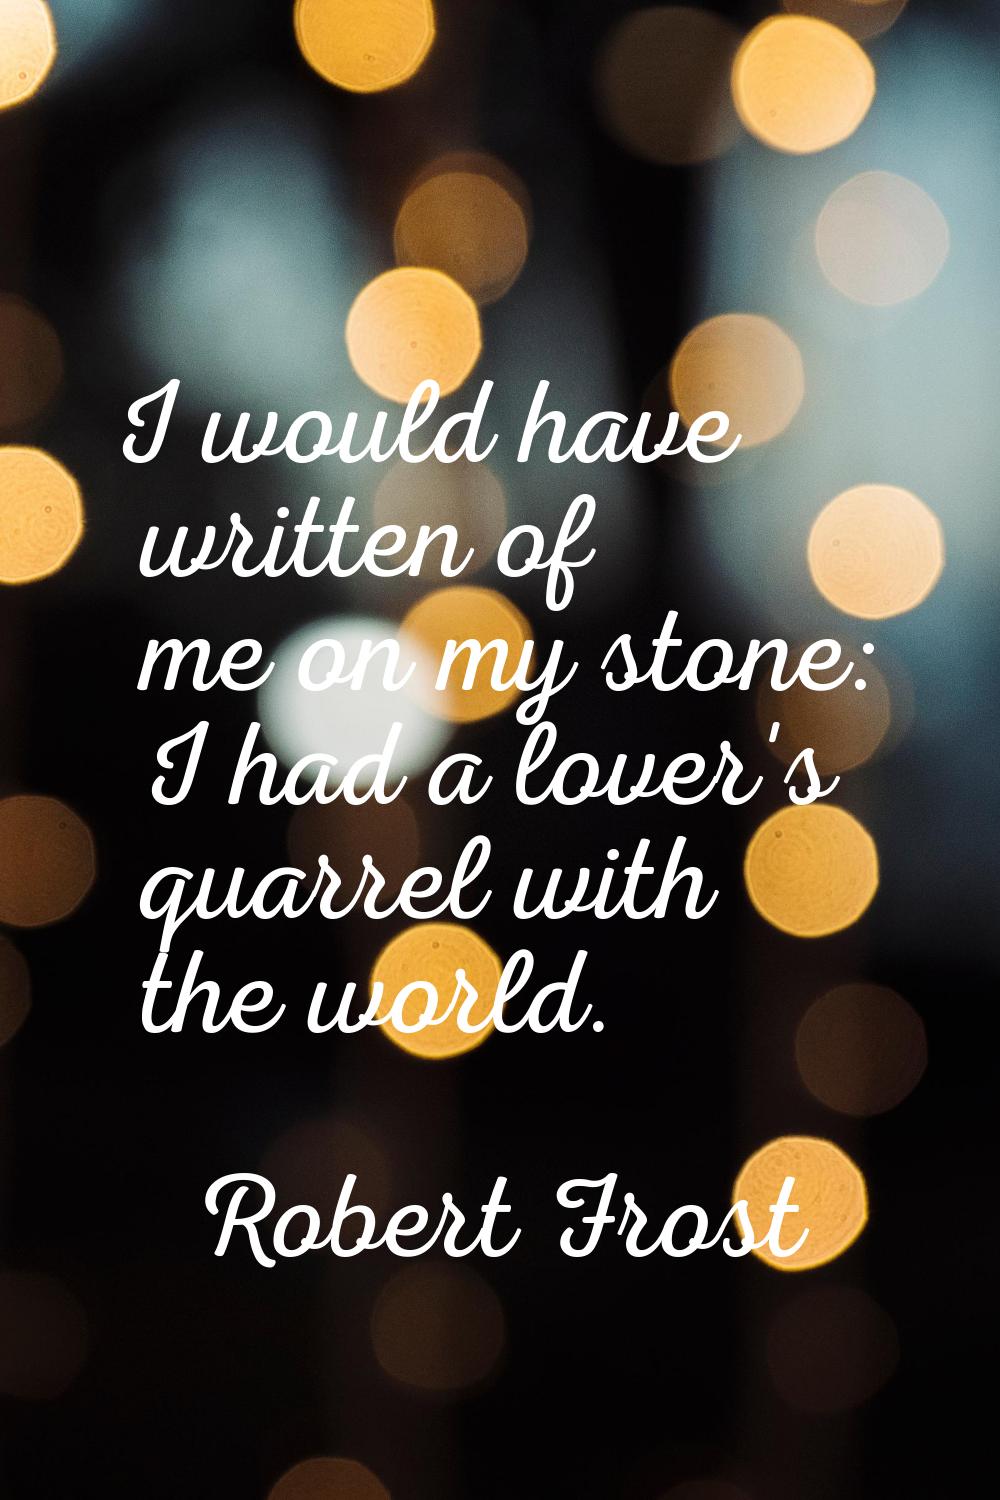 I would have written of me on my stone: I had a lover's quarrel with the world.